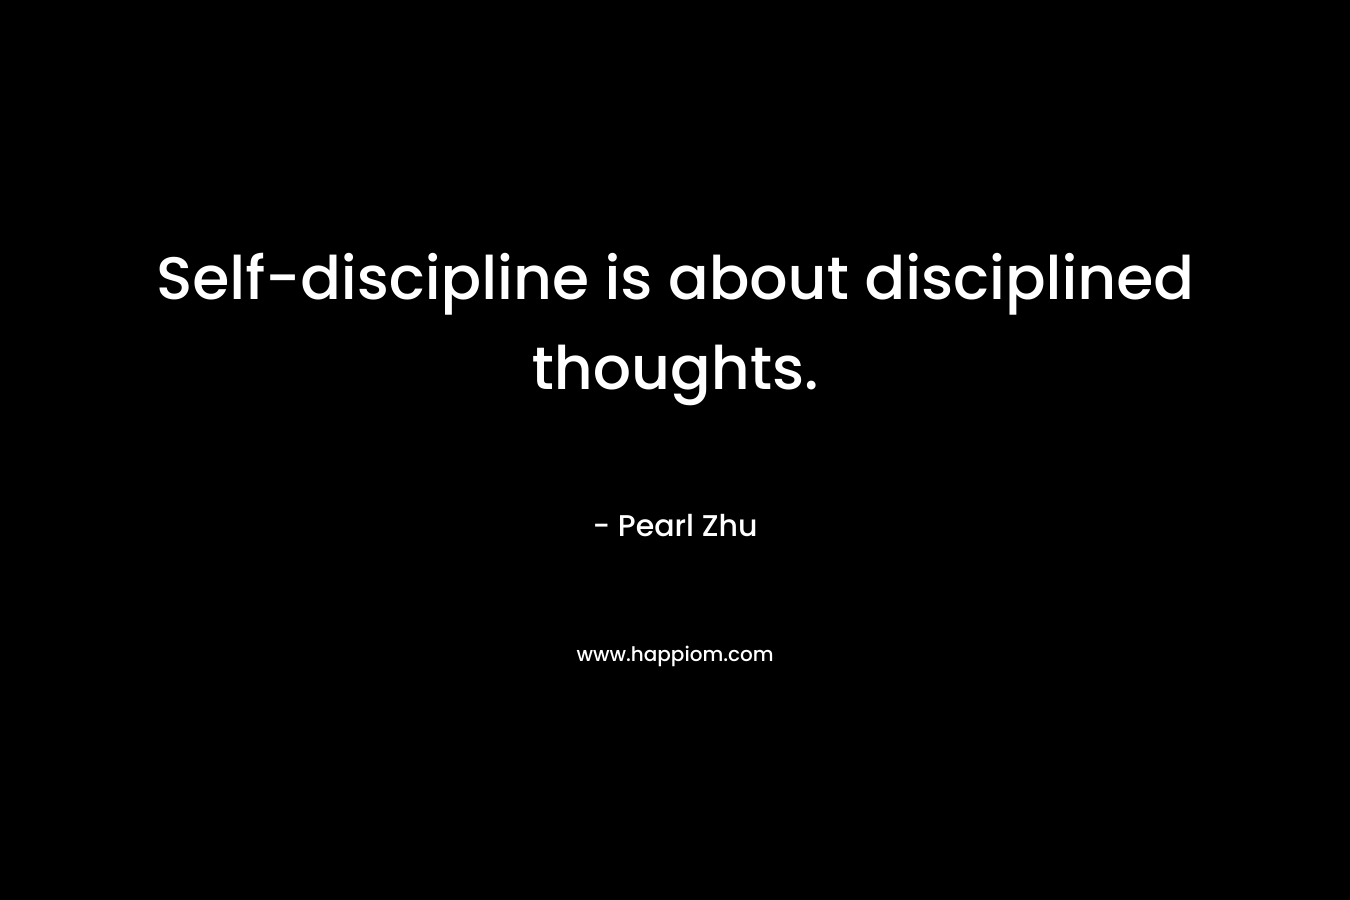 Self-discipline is about disciplined thoughts. – Pearl Zhu